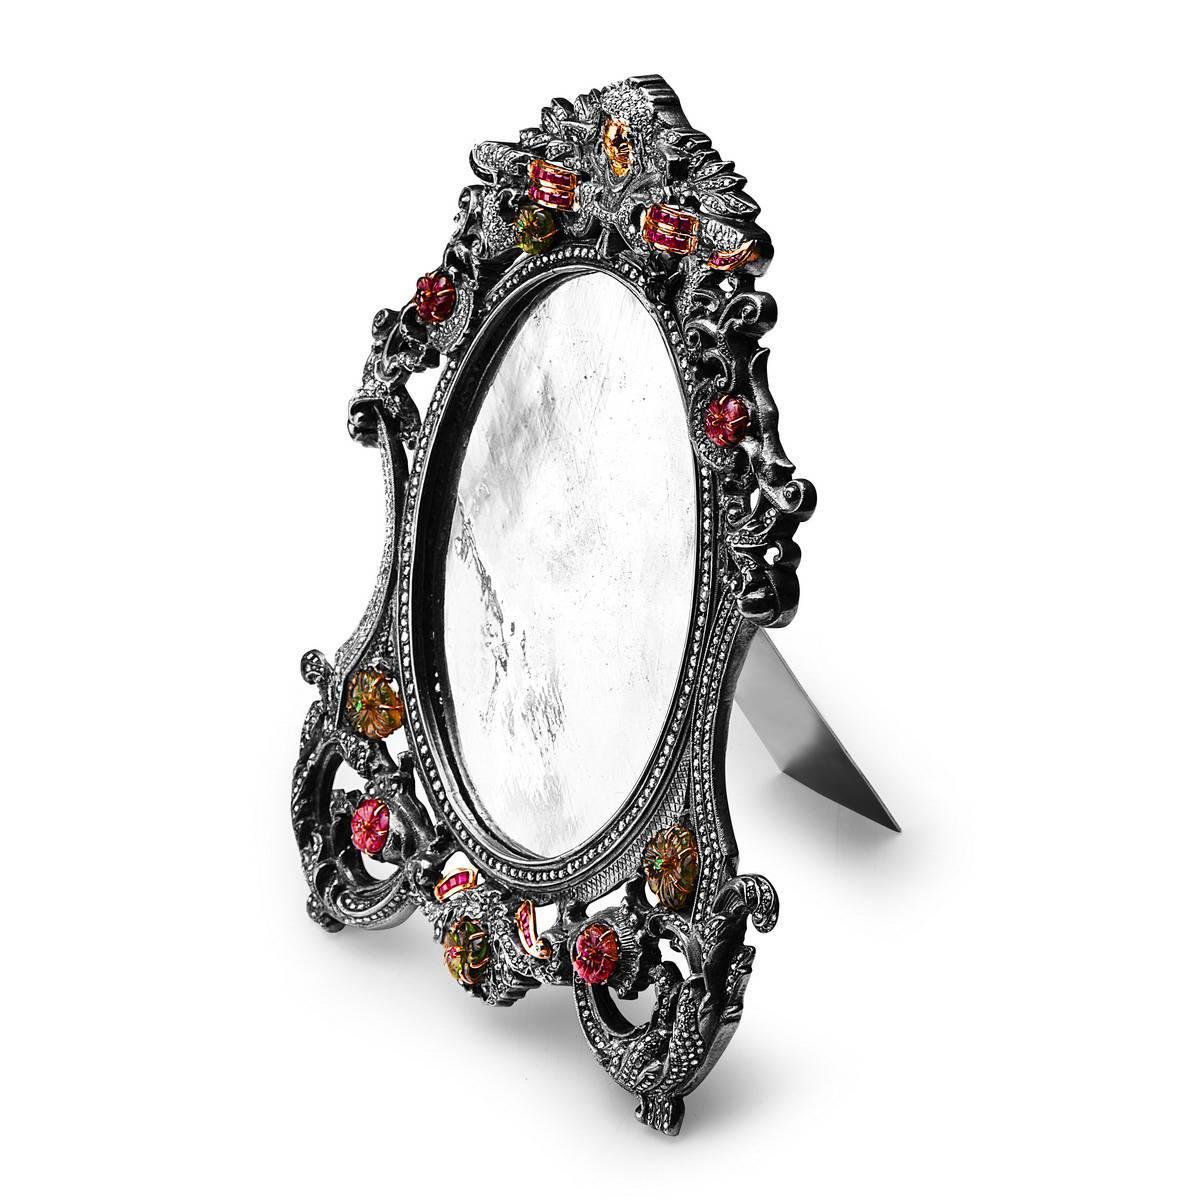 Victorian Looking Oval shape Photo Frame with carved designer floral patterns with diamonds, flower shape tourmaline, rubies and emeralds around. This piece look antique and to is perfect frame to frame you fondest memories! 

14KT GOLD          